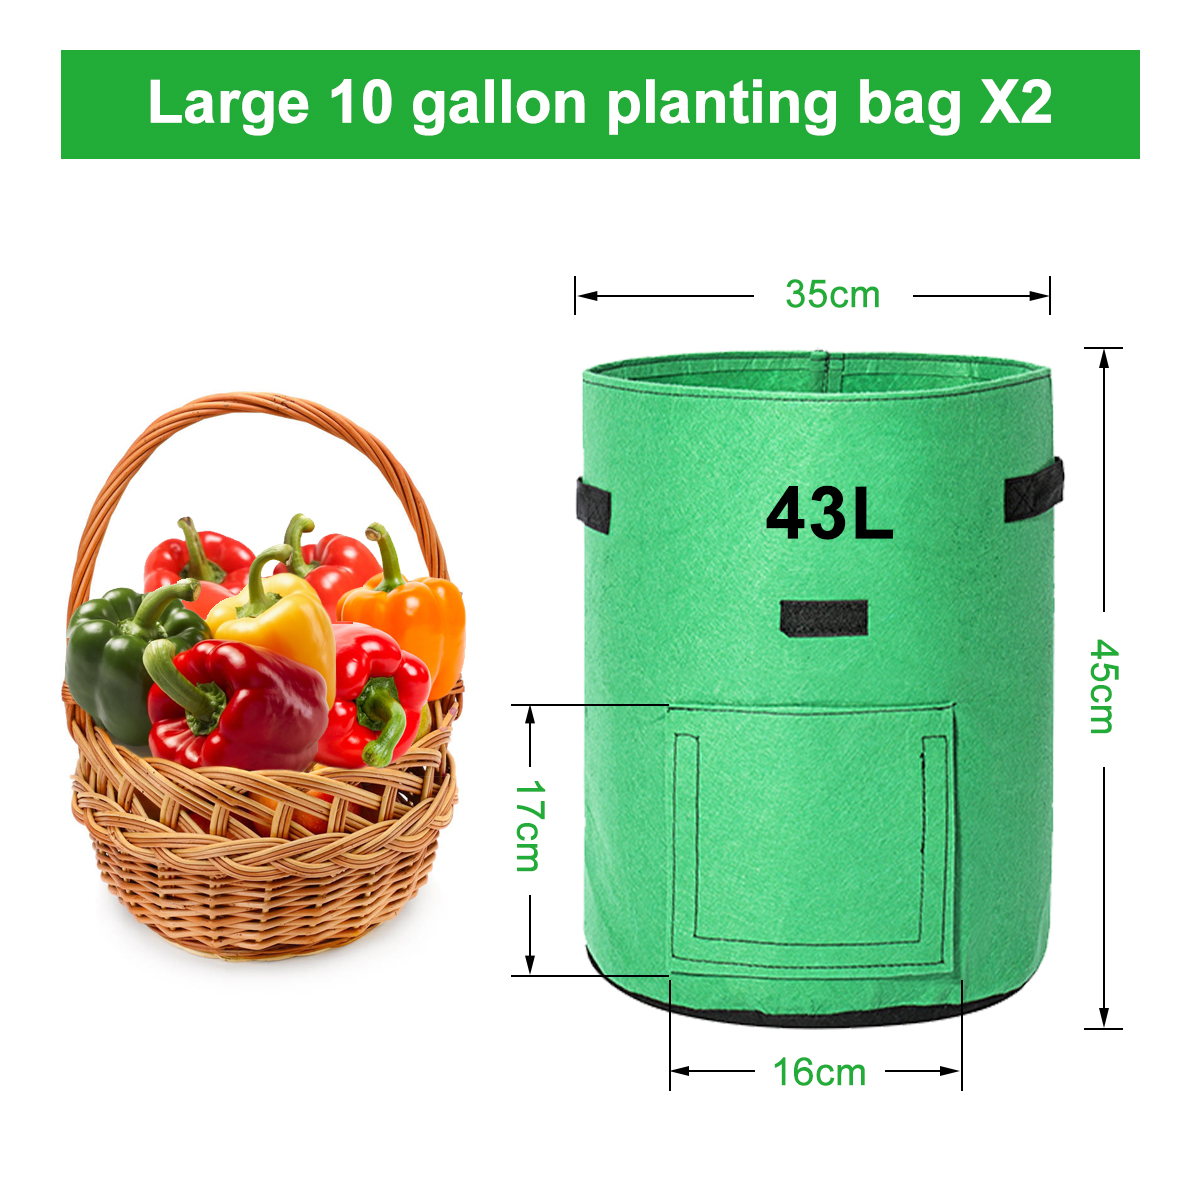 2-Pack-10-Gallon-Planting-Pouch-Fabric-Pots-Premium-Breathable-Cloth-Bags-for-Potato-Plant-Container-1796789-11